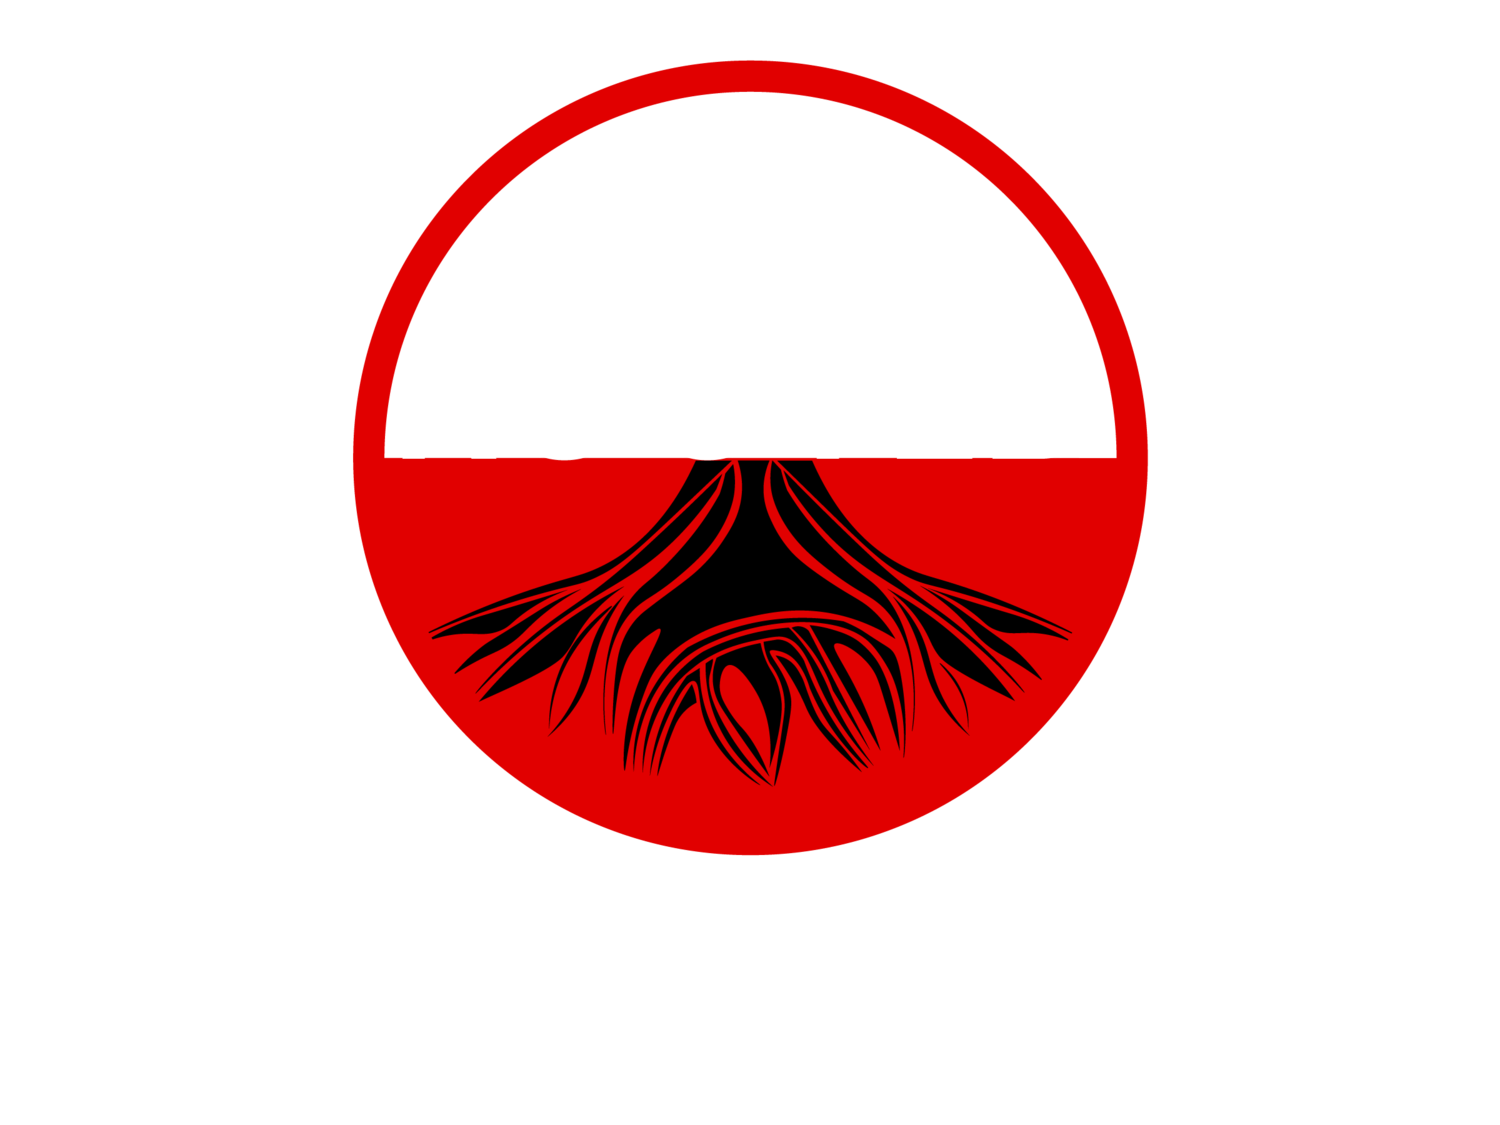 Rooted Men's Ministry